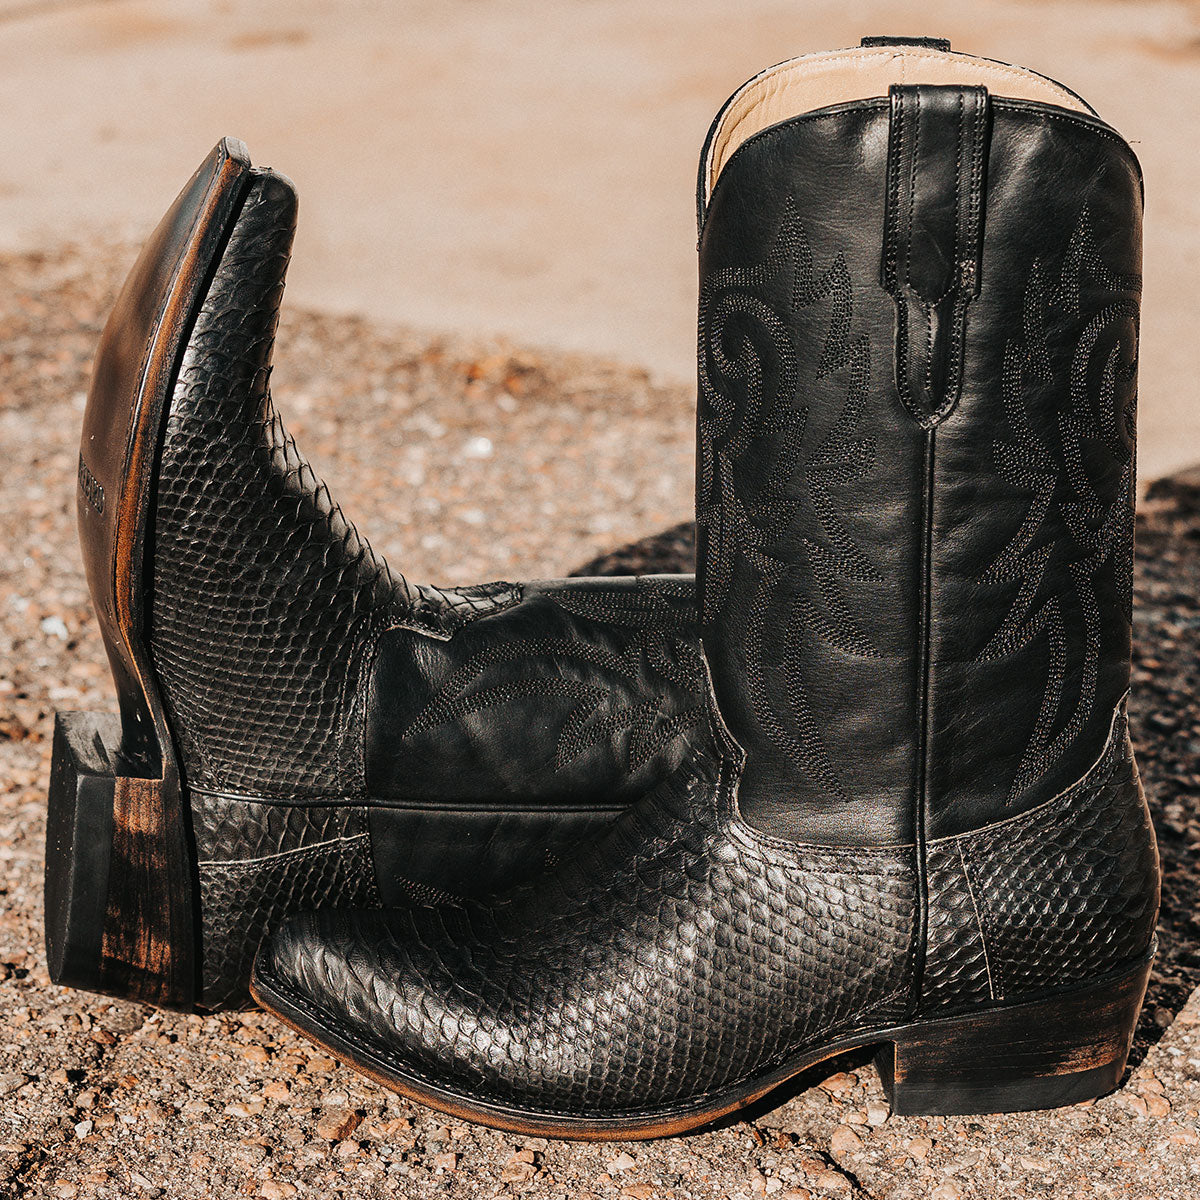 FREEBIRD men's Marshall black python leather western cowboy boot with shaft stitch detailing, snip toe construction and leather pull straps